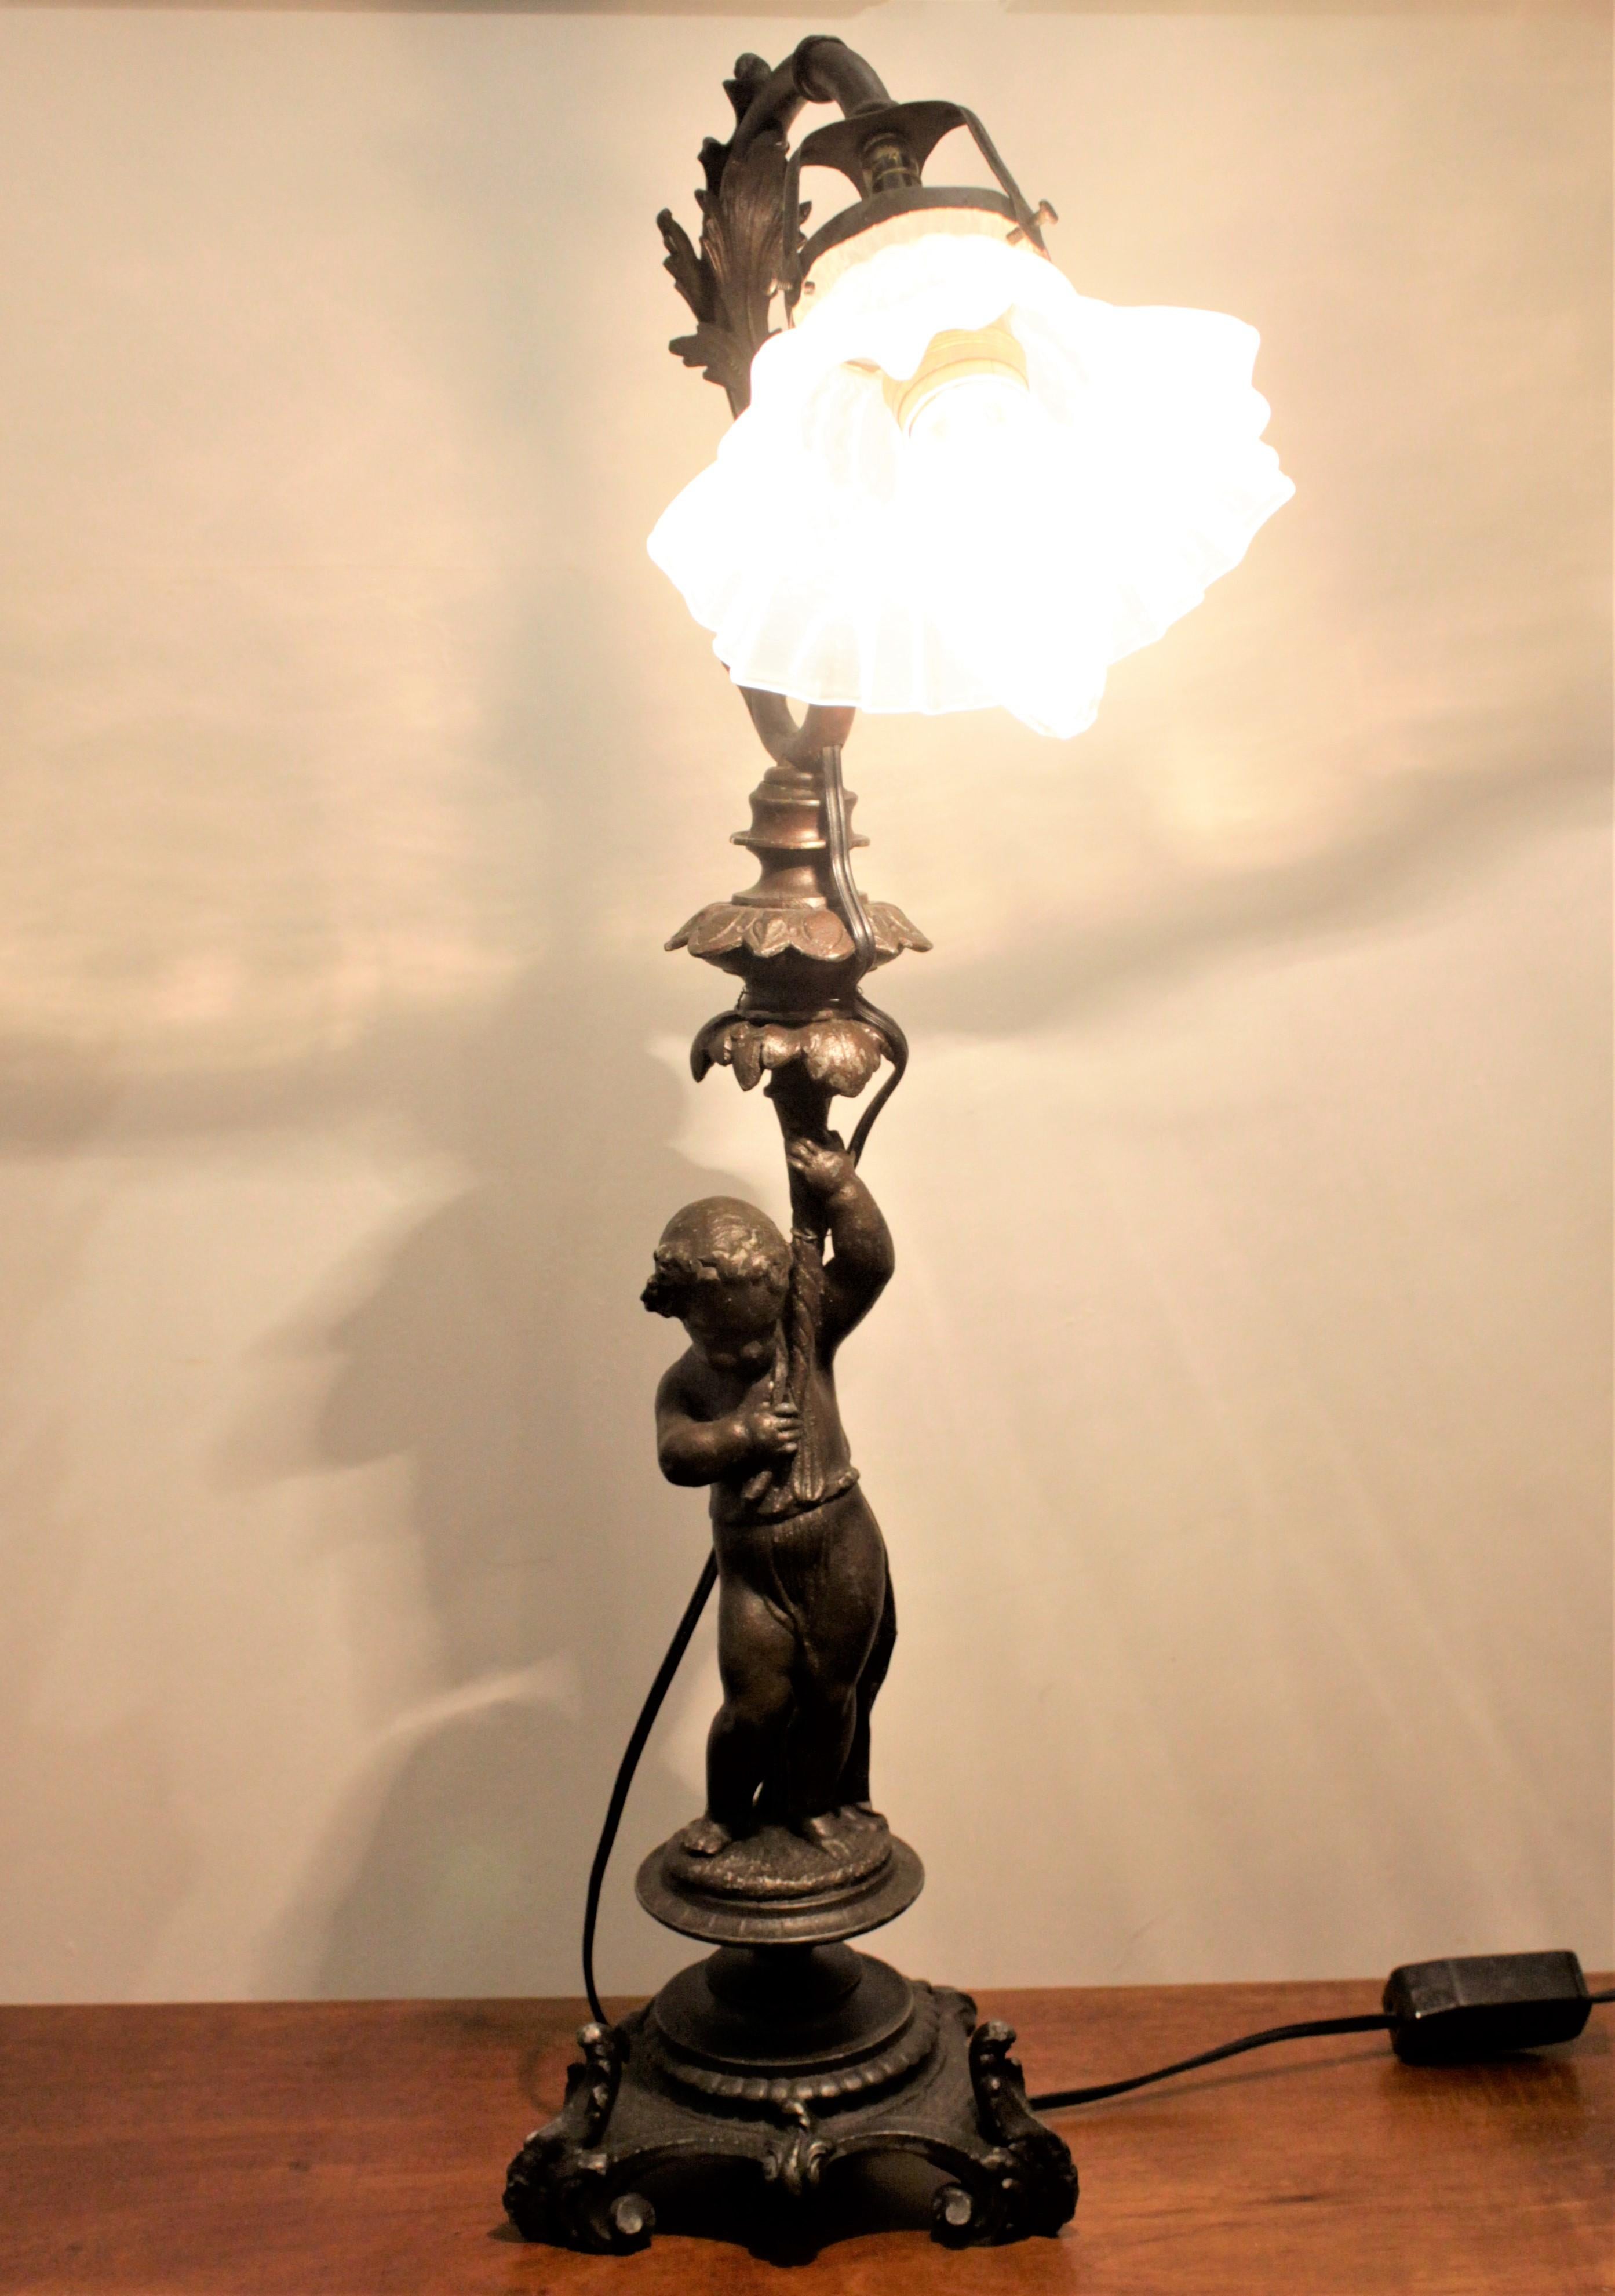 This antique cast spelter figural cherub lamp has no maker's marks, but is presumed to have originated from Italy in the late 19th century and in Victorian style. The lamp features an ornately cast cherub standing on a round pedestal which sits on a